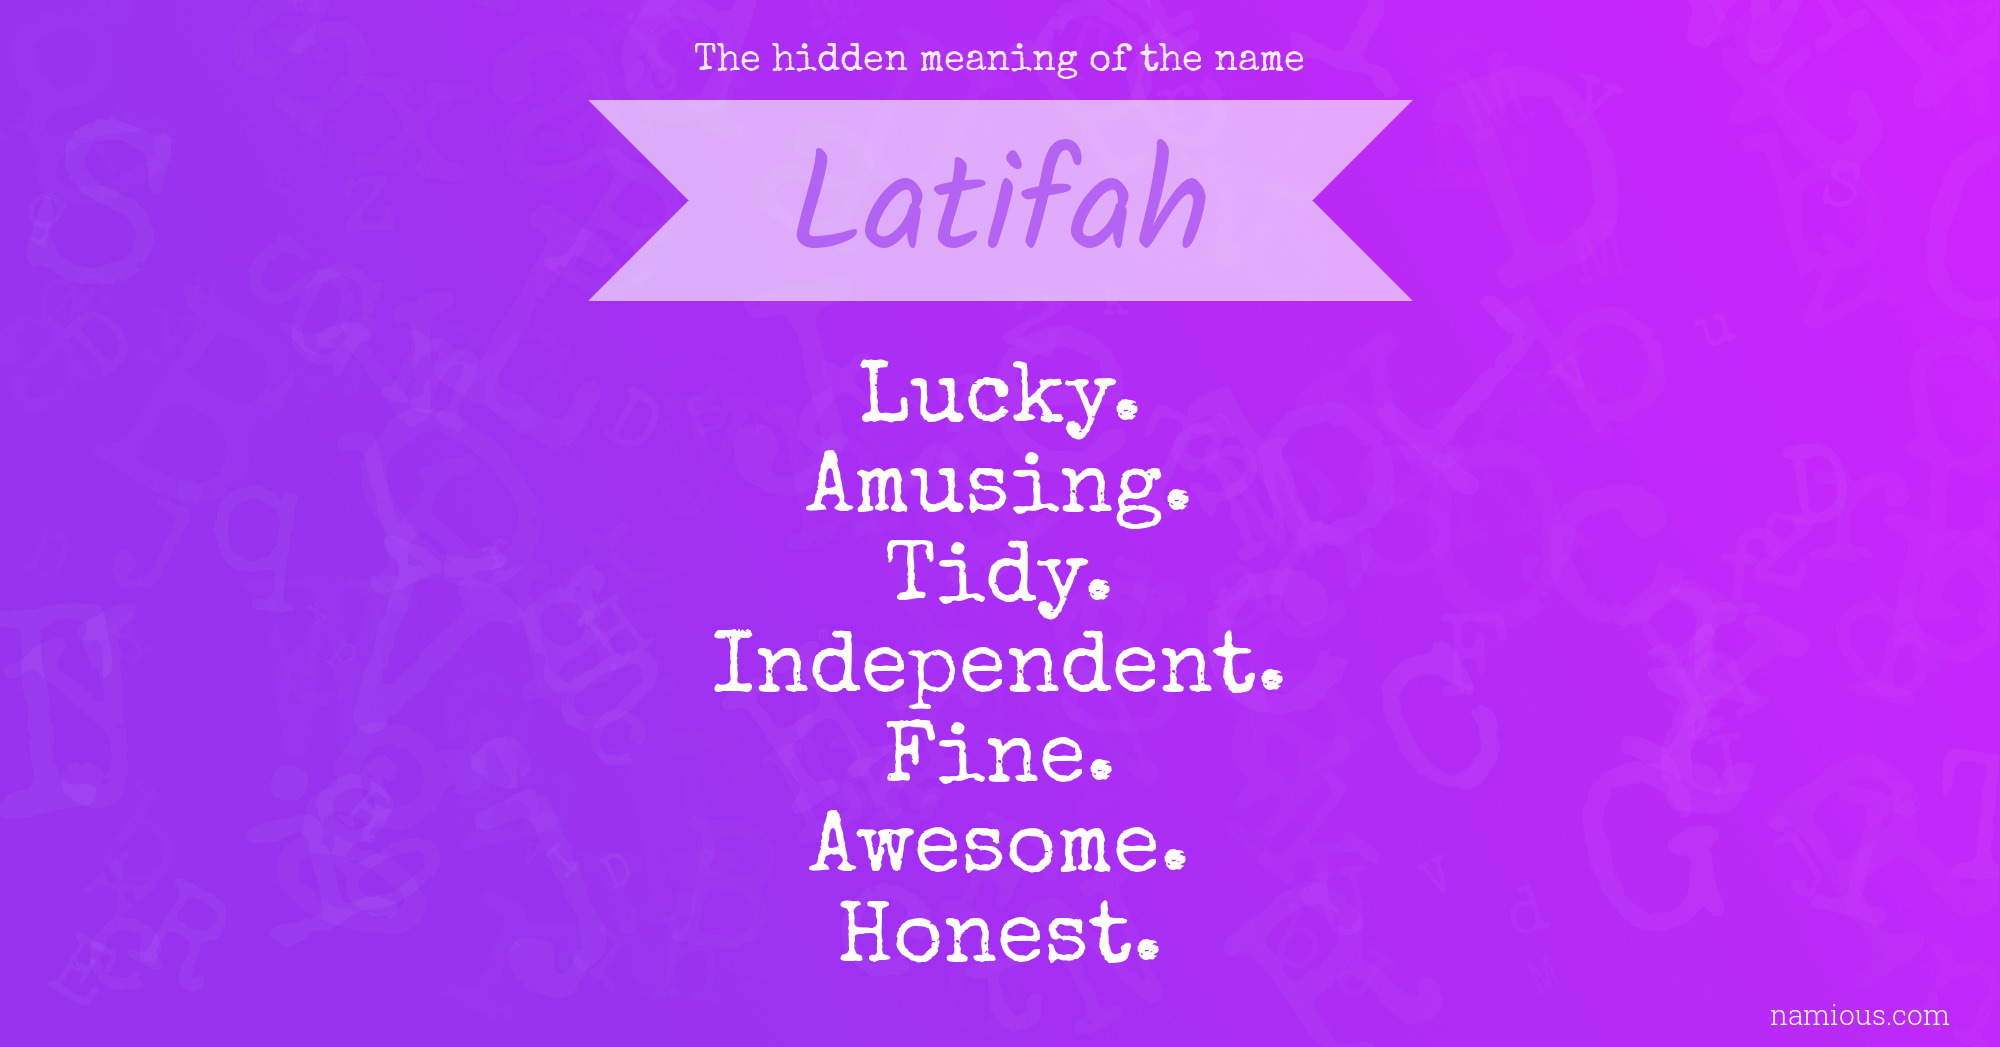 The hidden meaning of the name Latifah